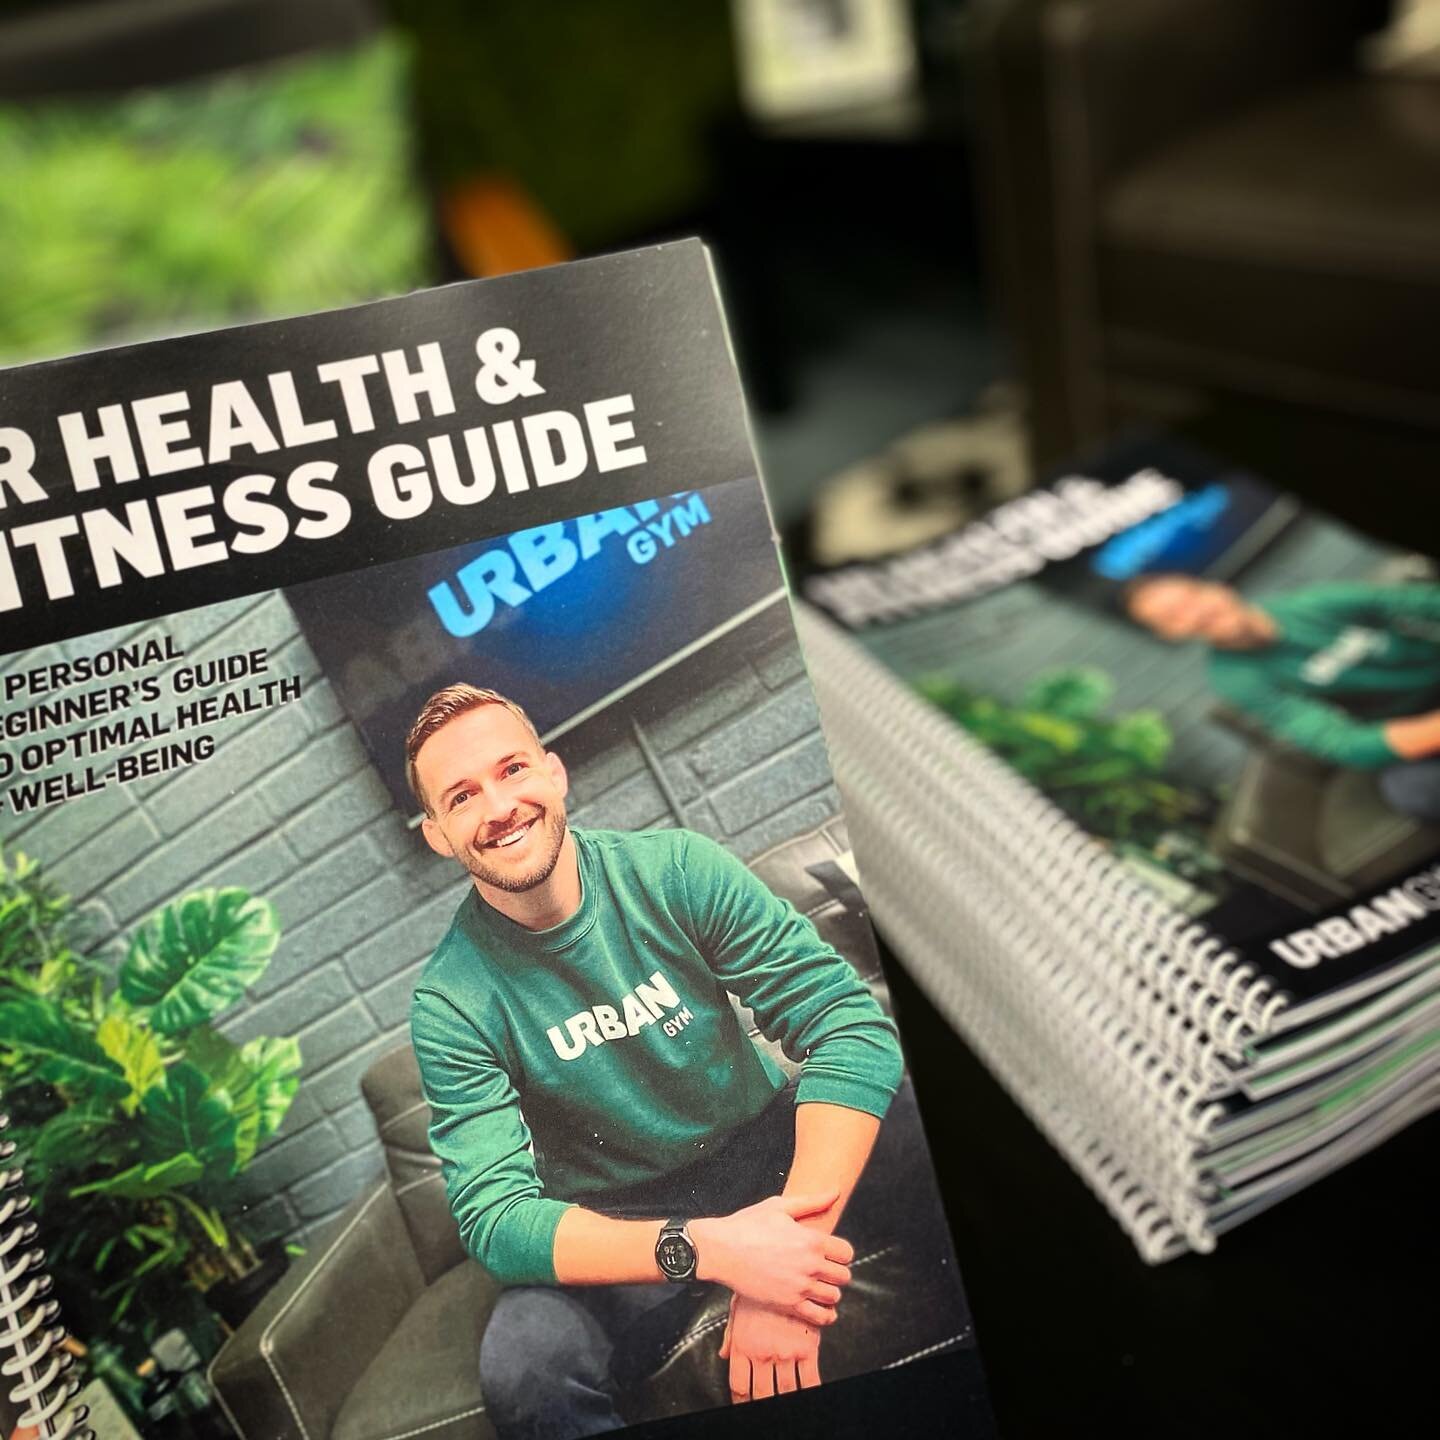 Buzzing with the response to our book! 💚 Have you got yours? 
.
Few hard copies left but we can always reorder more but always available to download too if you can&rsquo;t wait for the physical copy!
.
UR Personal Beginner&rsquo;s Guide to optimal h